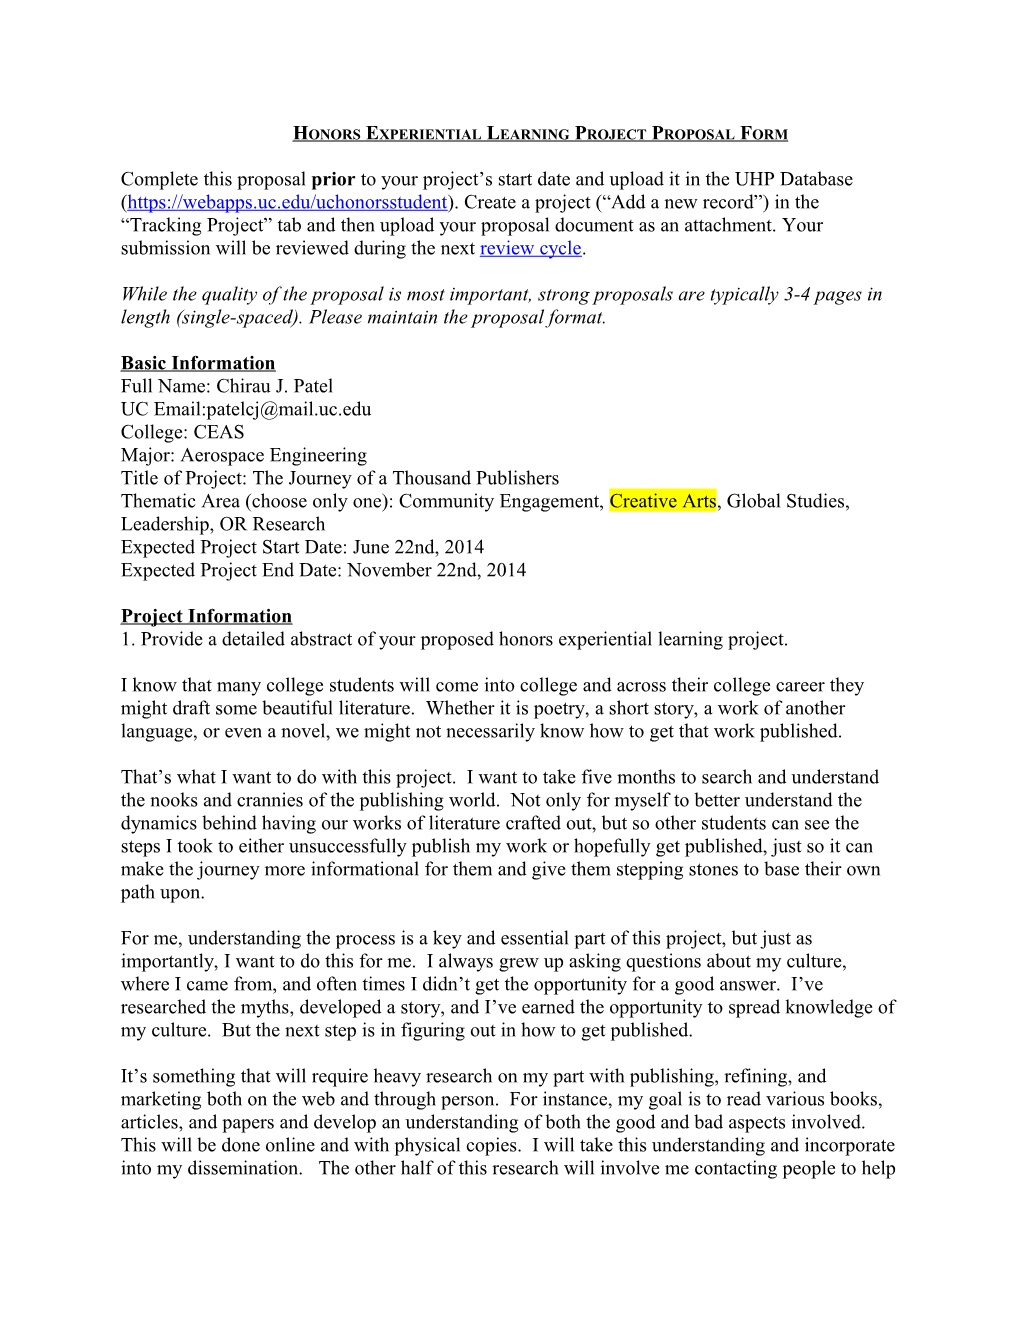 Honors Experiential Learning Project Proposal Form